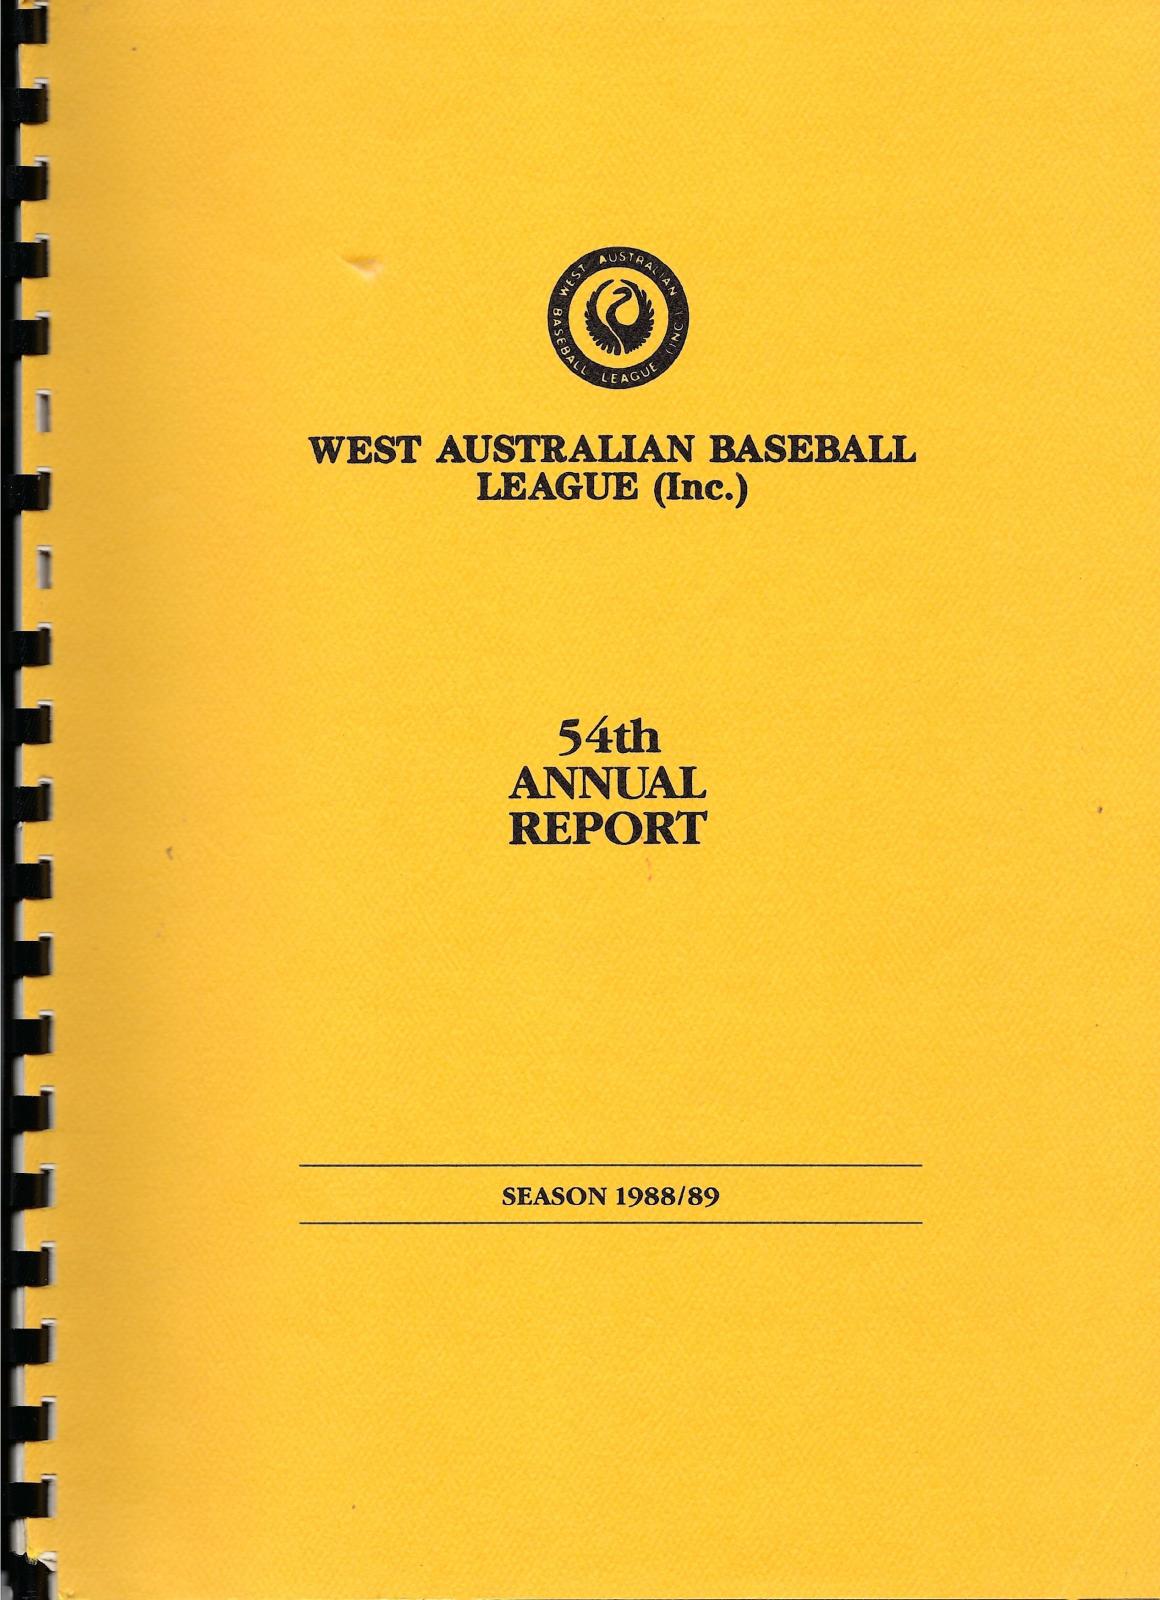 West Australian Baseball League 54th Annual Report 1988-89 cover page